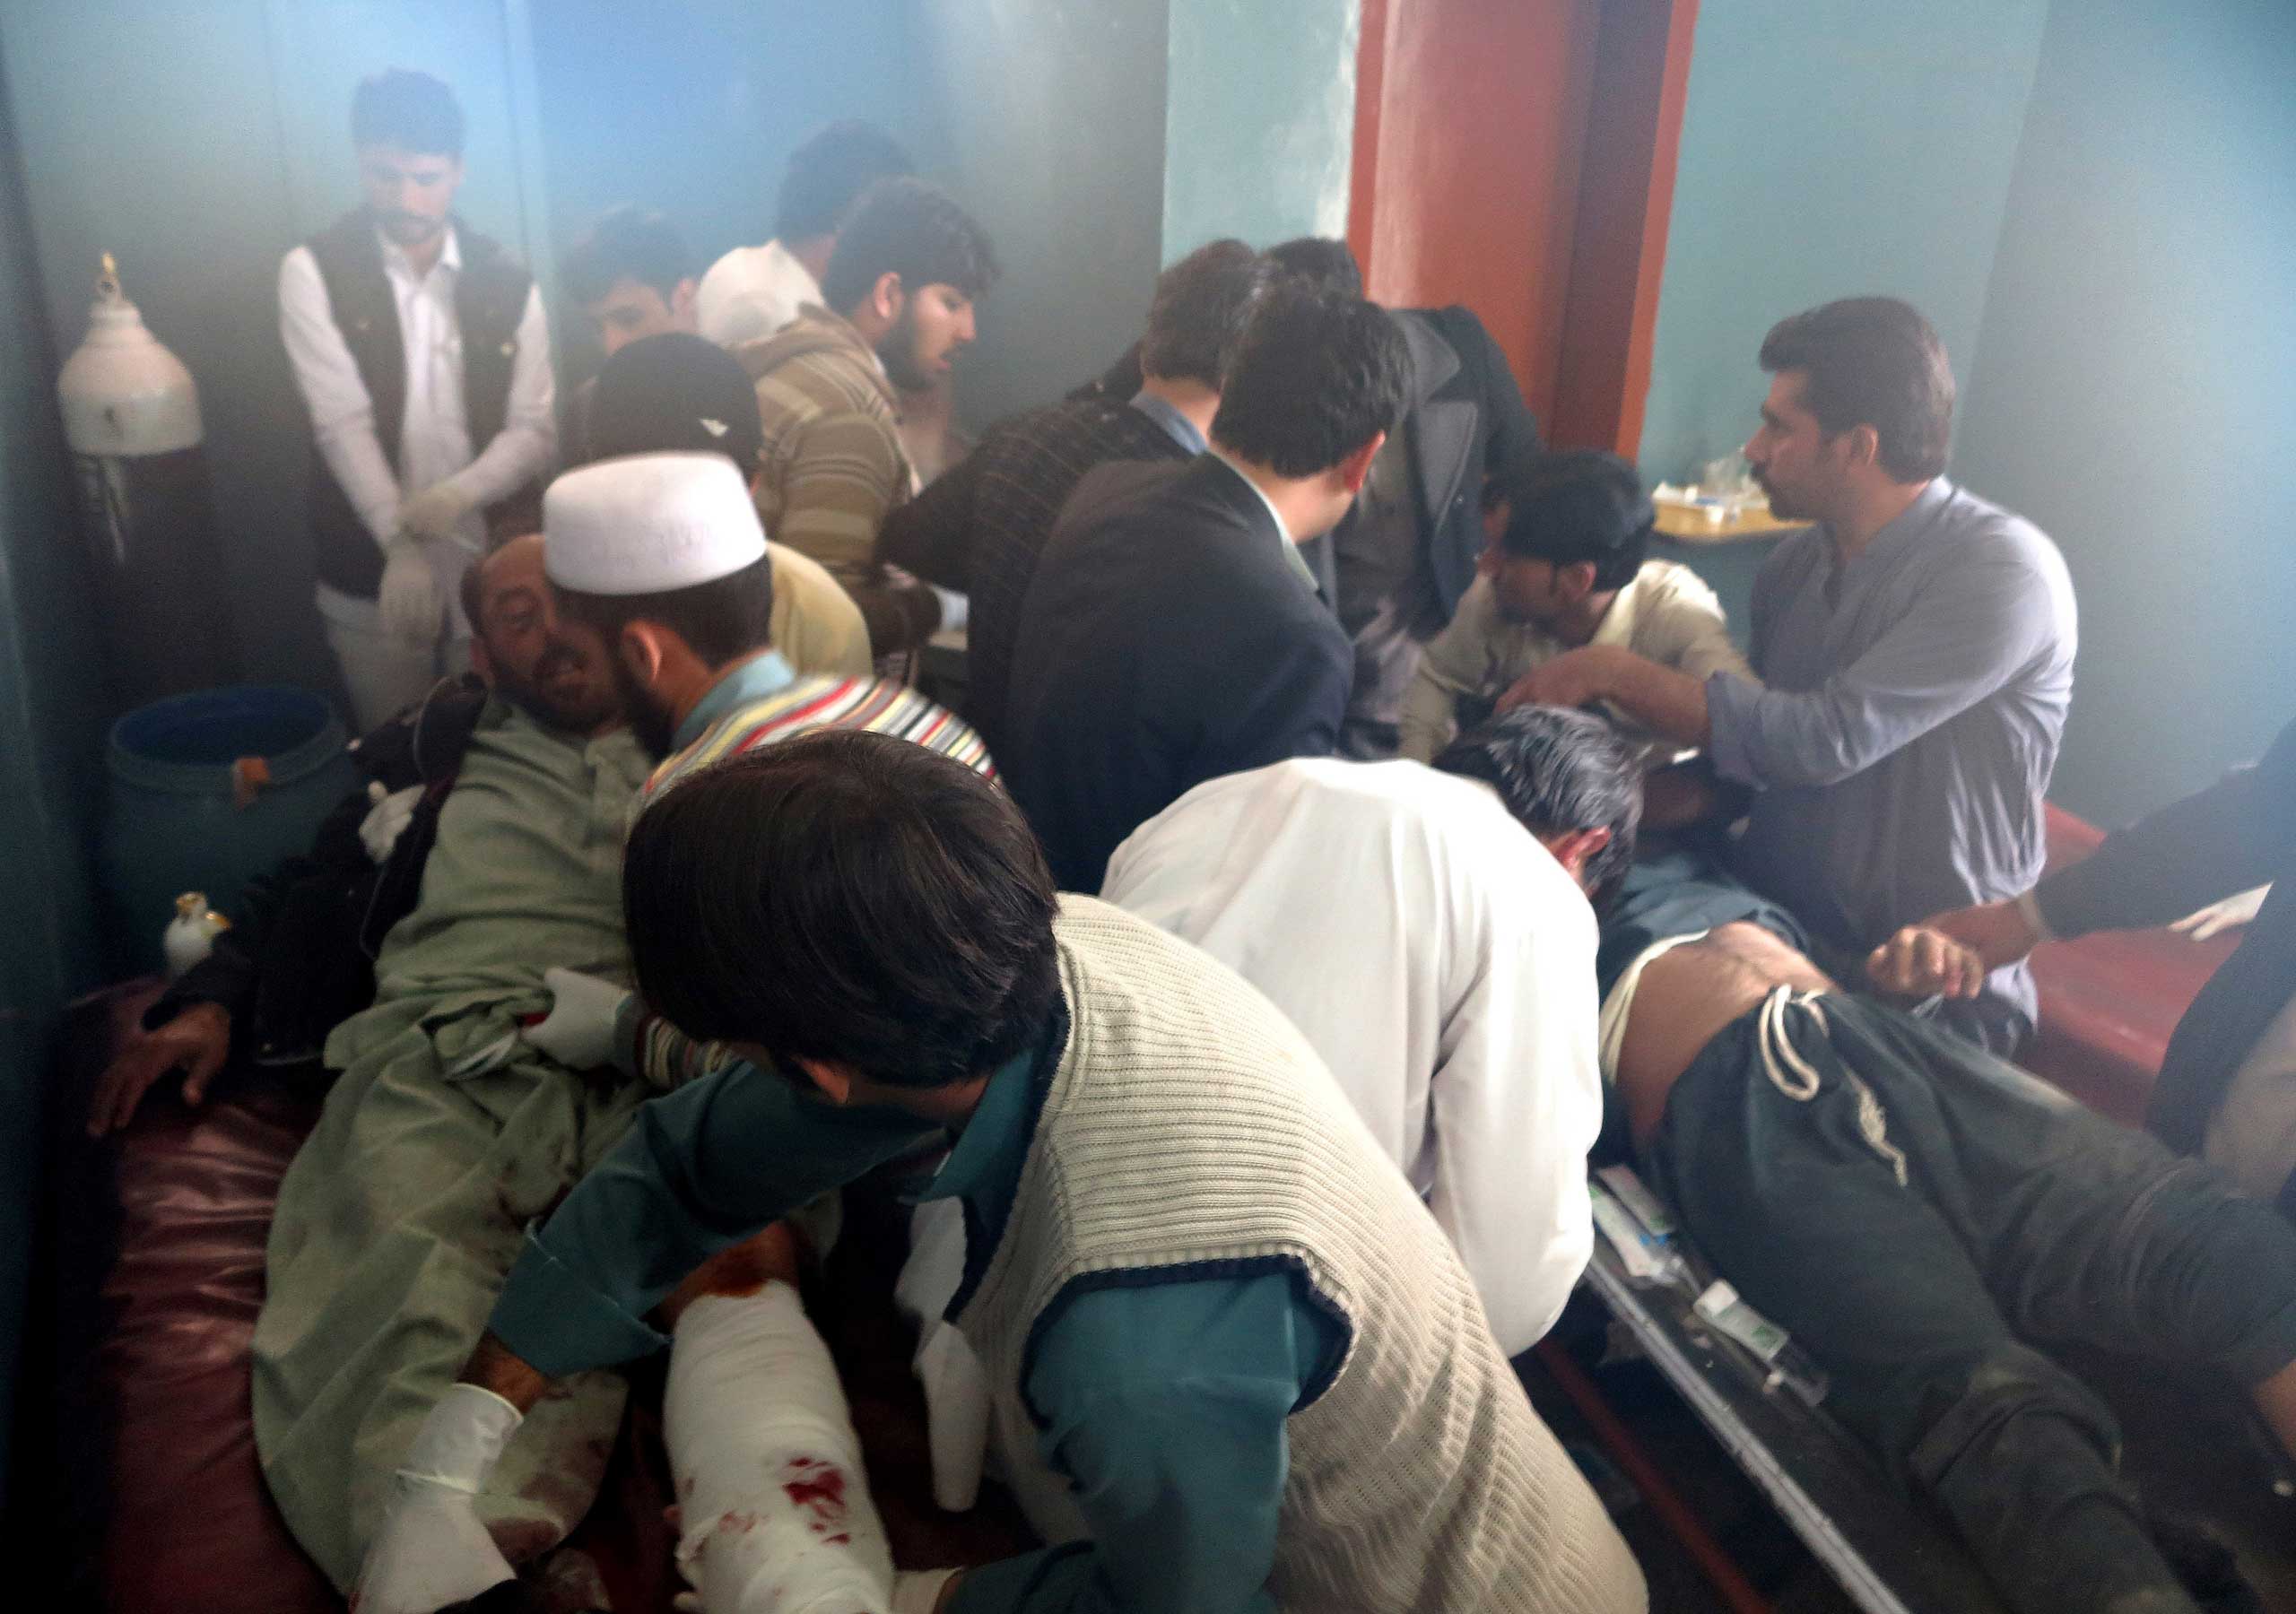 Patients are brought to a hospital after severe earthquake was felt in Mingora, Swat valley, Pakistan, on Oct. 26, 2015.